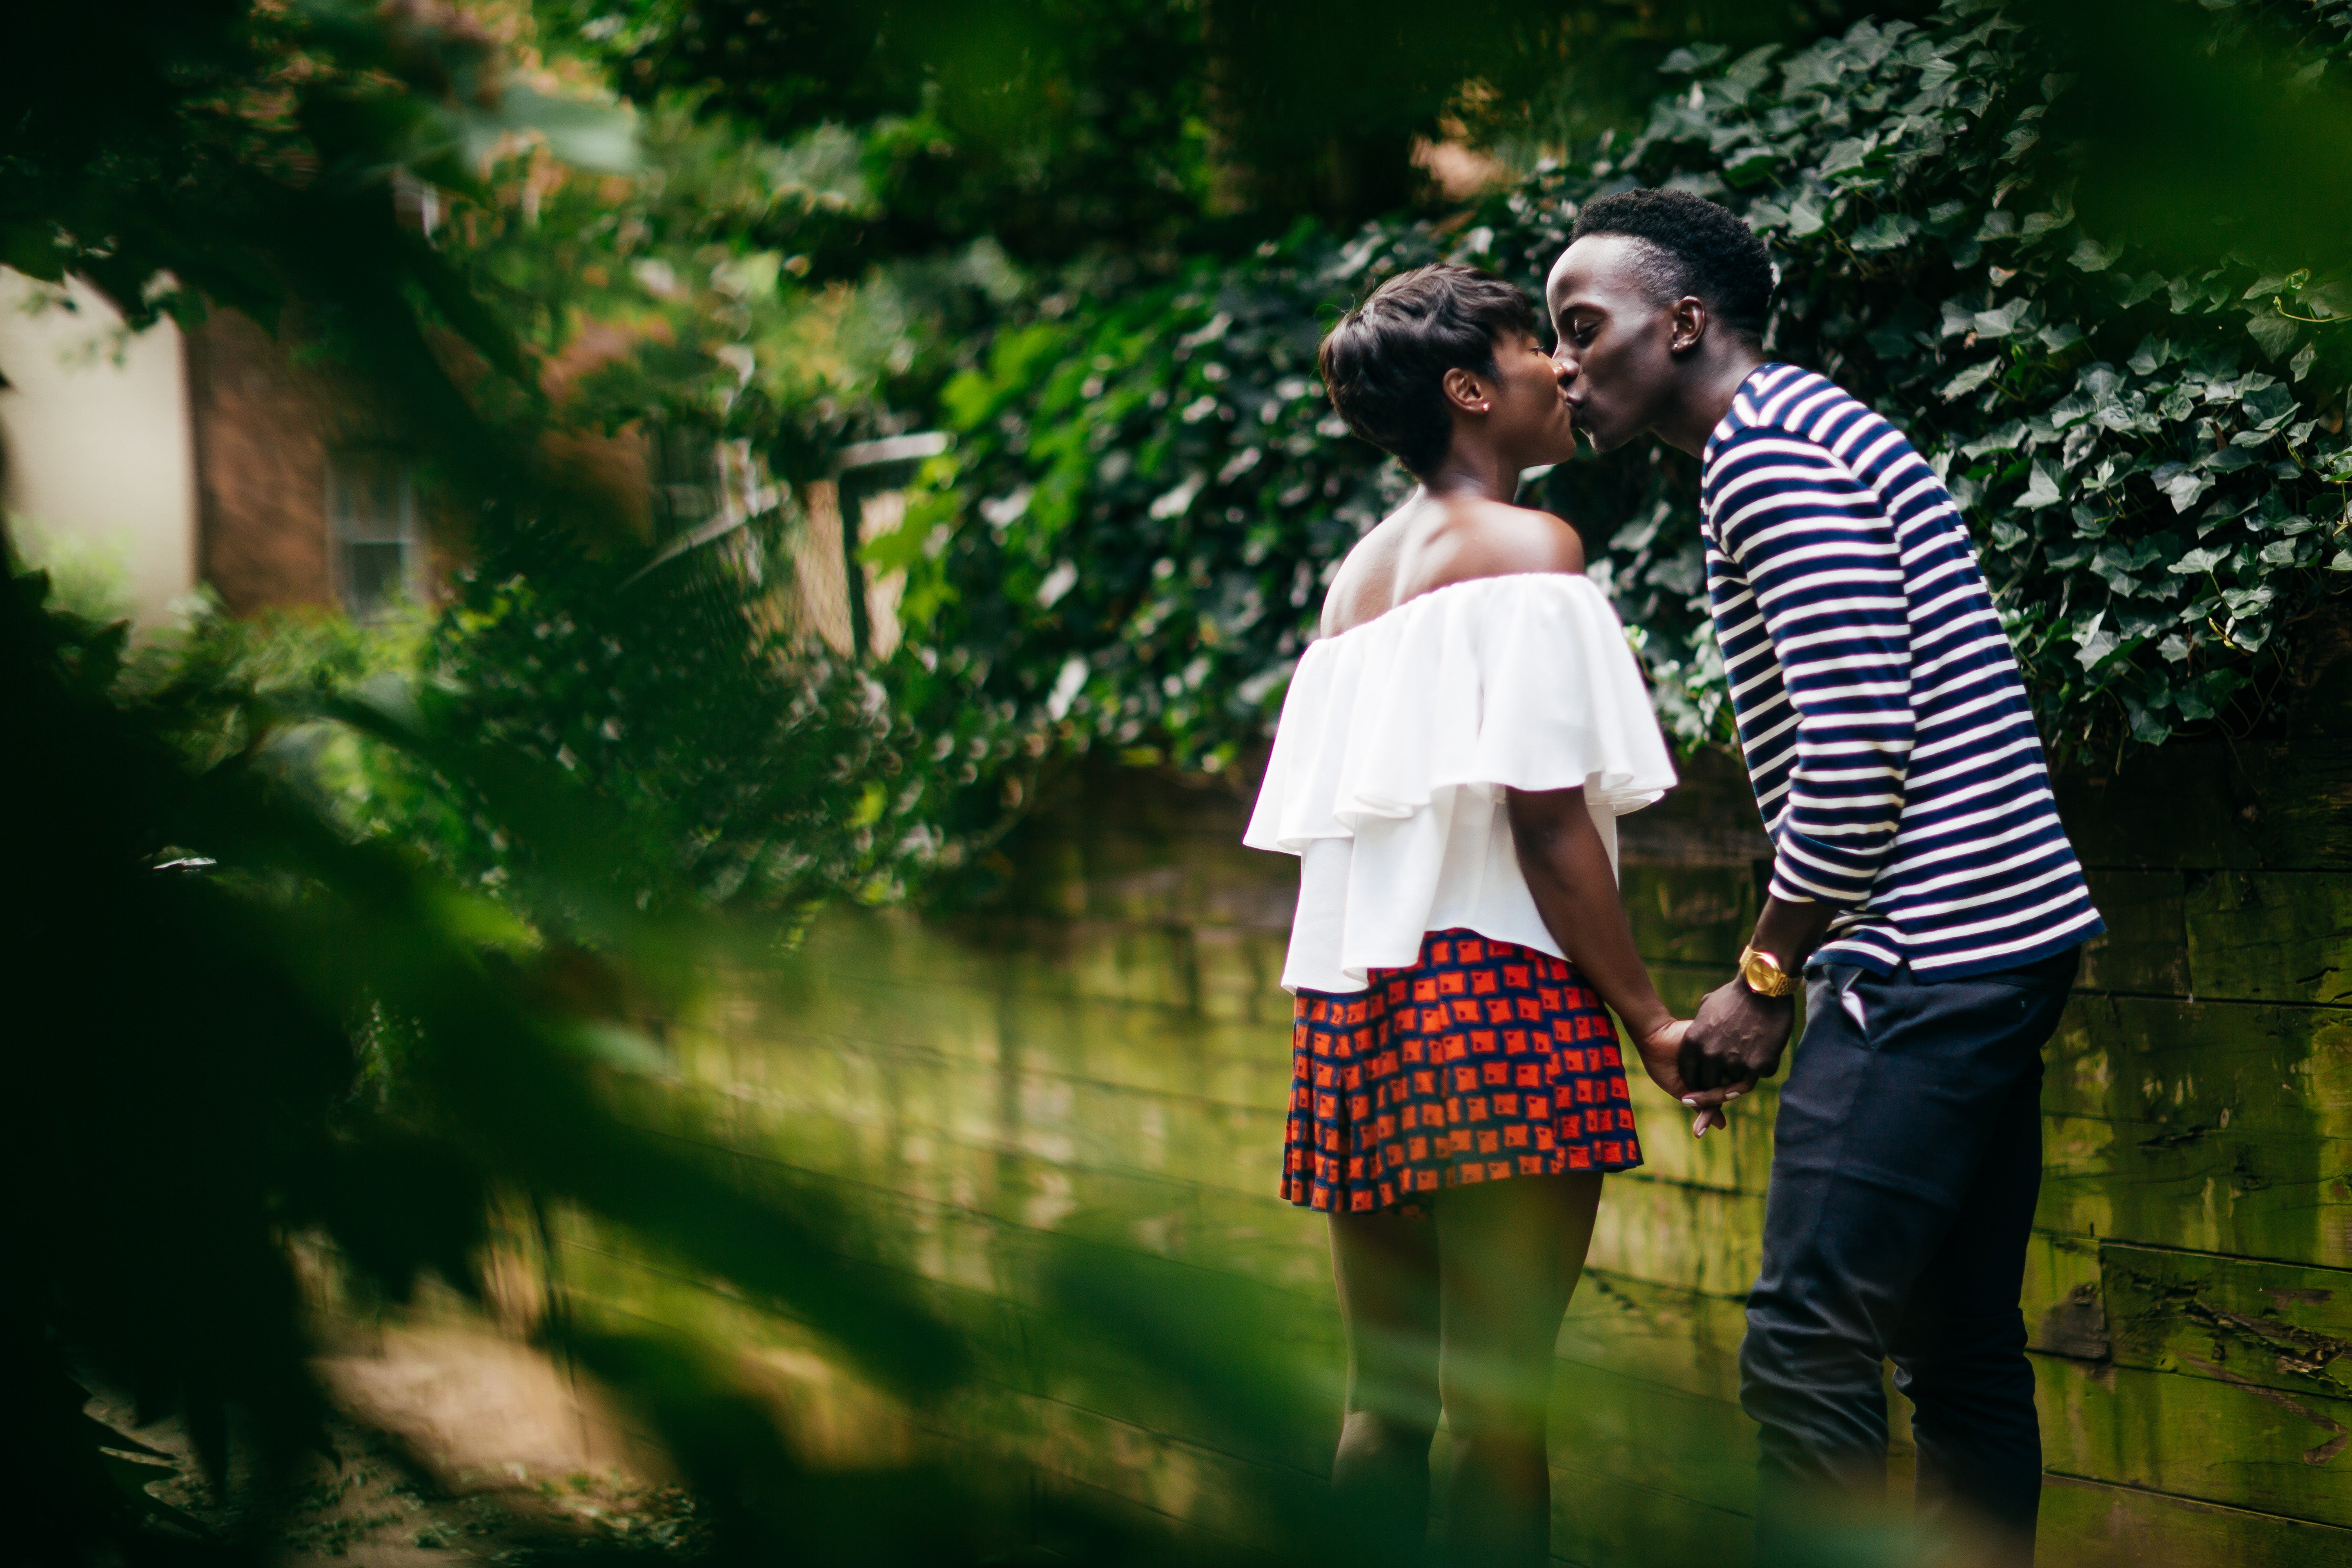 This Is Black Love: 24 Beautiful Photos, 8 Adorable Couples and Countless Relationship Gems
